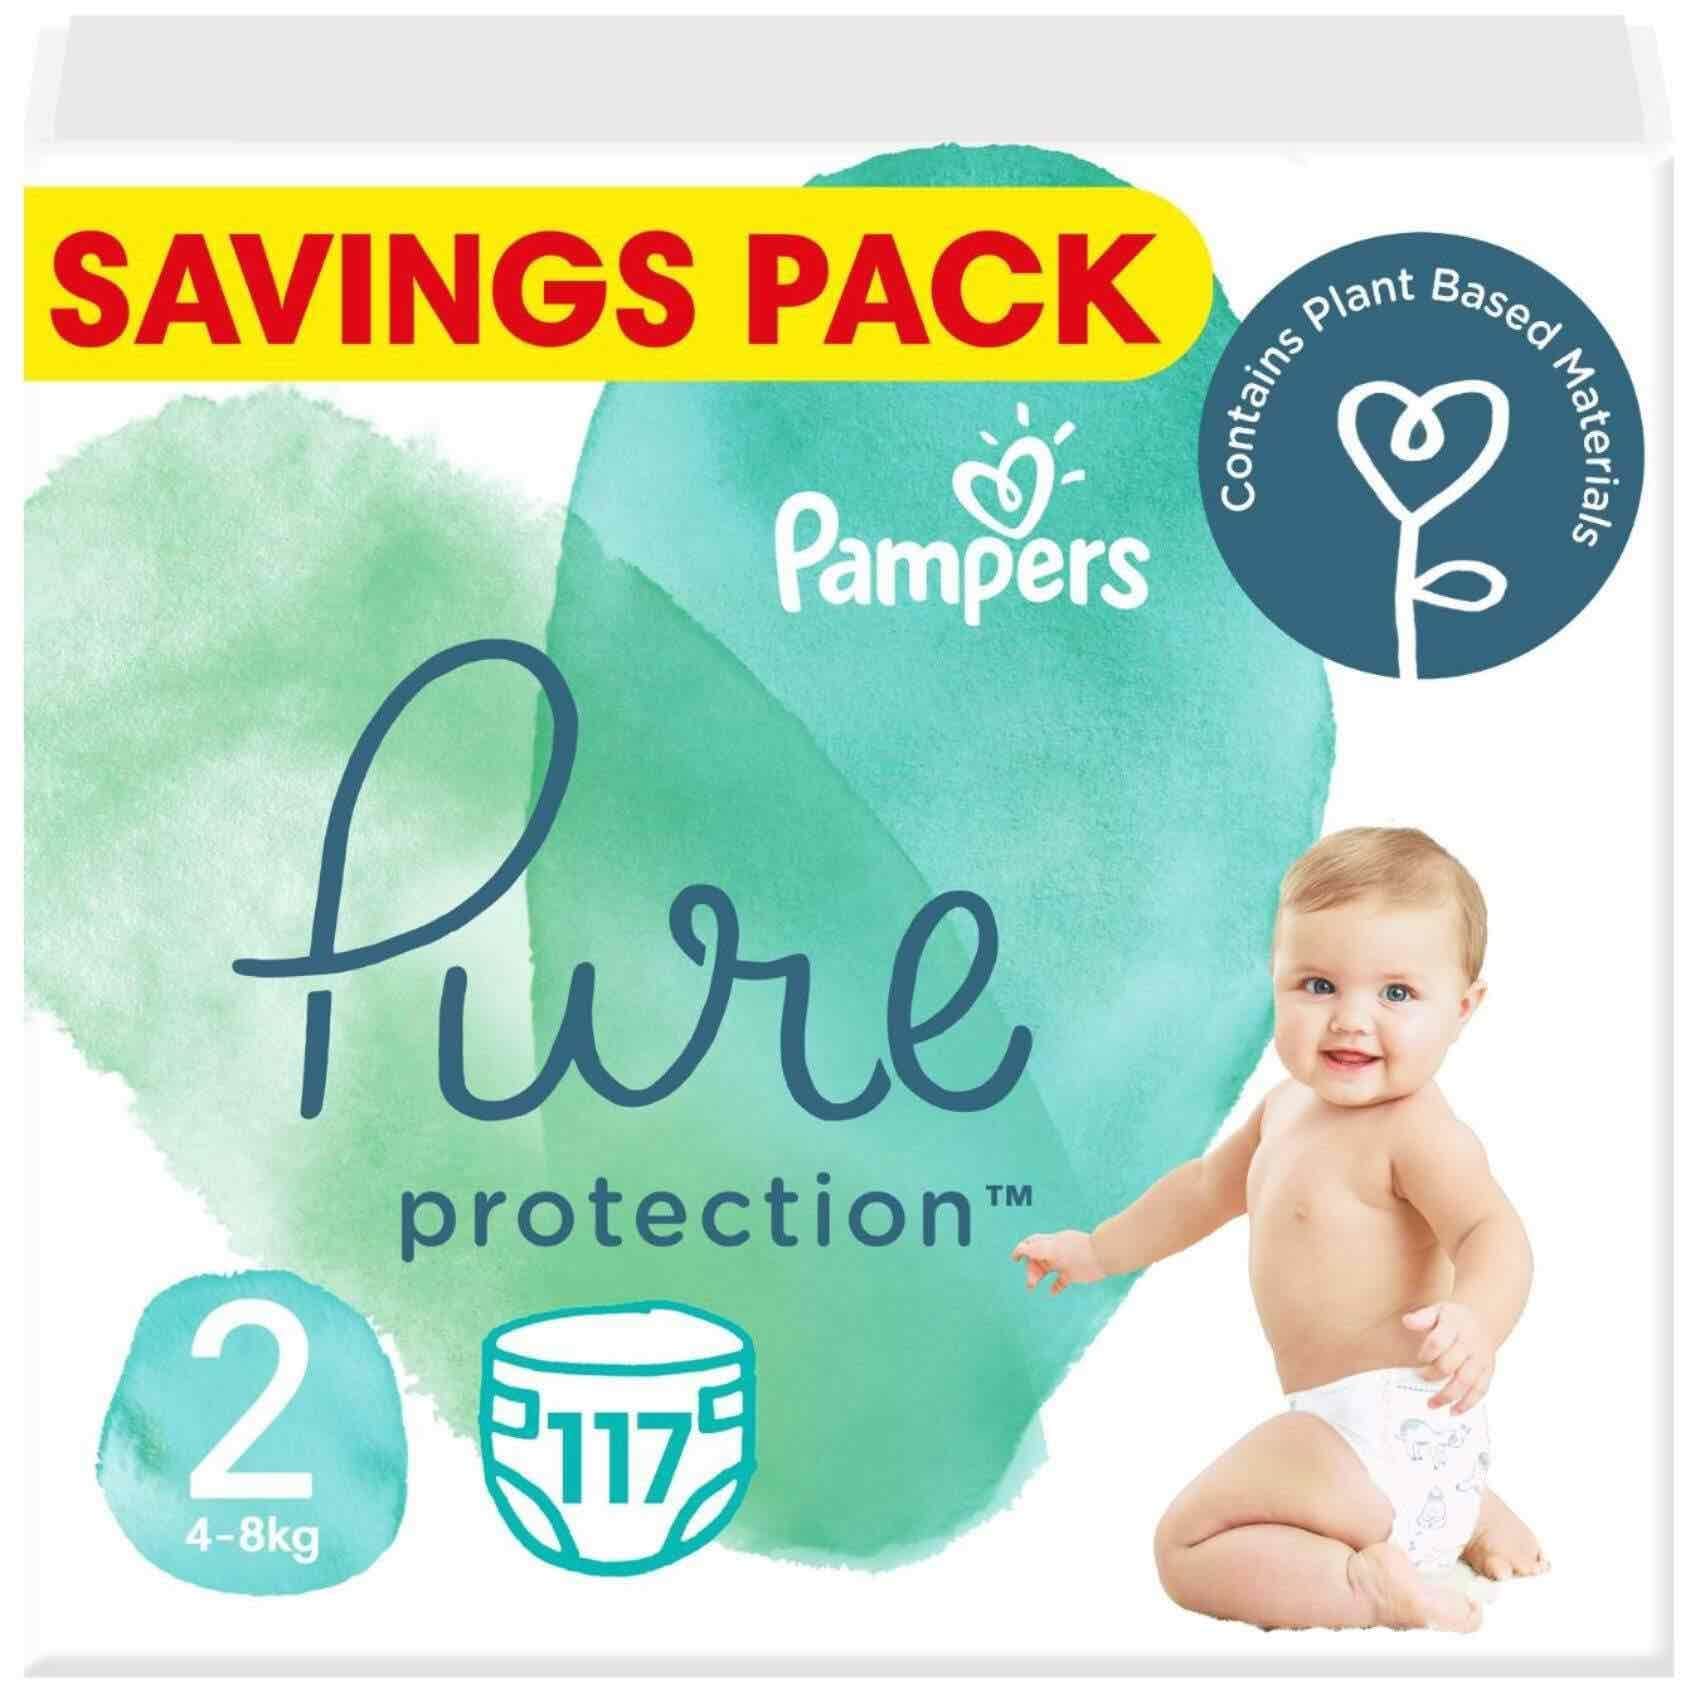 Buy Pampers Pure Protection Dermatologically Tested Diapers Size 2 4-8kg 39  Diapers Pack of 3 Online - Shop Baby Products on Carrefour UAE